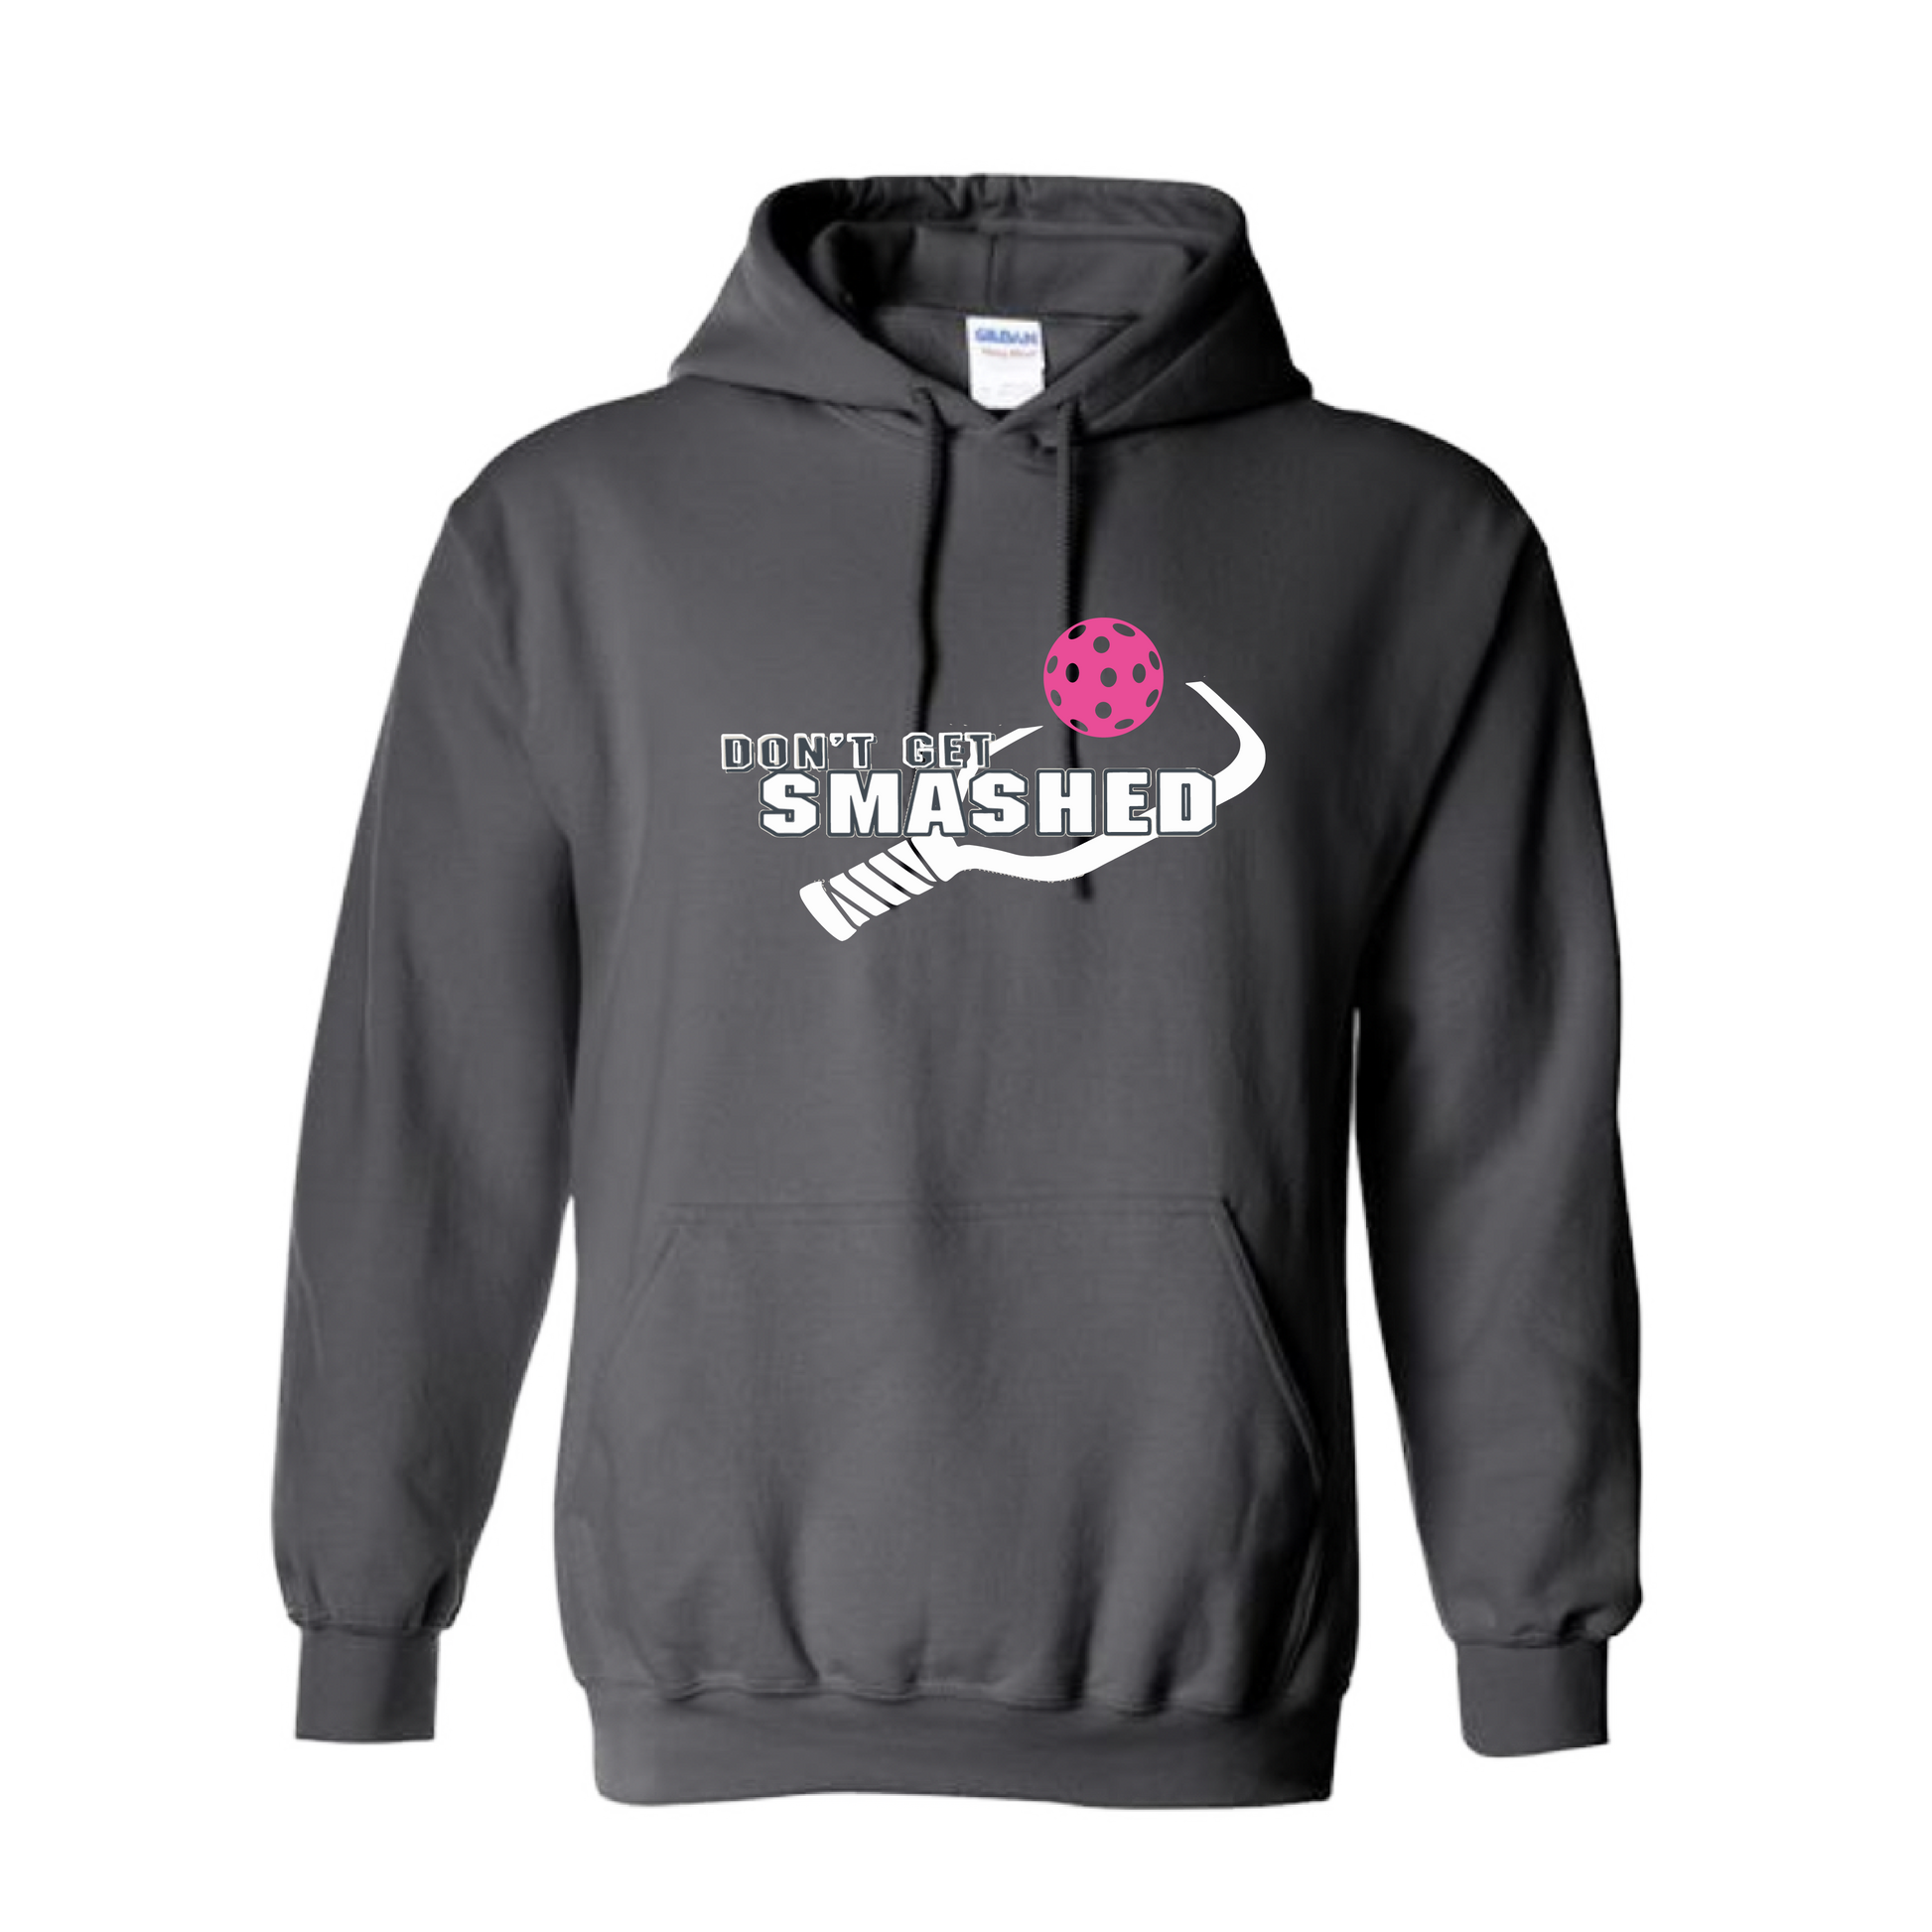 This cozy unisex hoodie will keep you toasty on the Pickleball court - soft, ultra-comfortable, and moisture-wicking with a double-lined hood and front pouch pocket. Get ready to be the star of the game with this eye-catching piece of apparel!